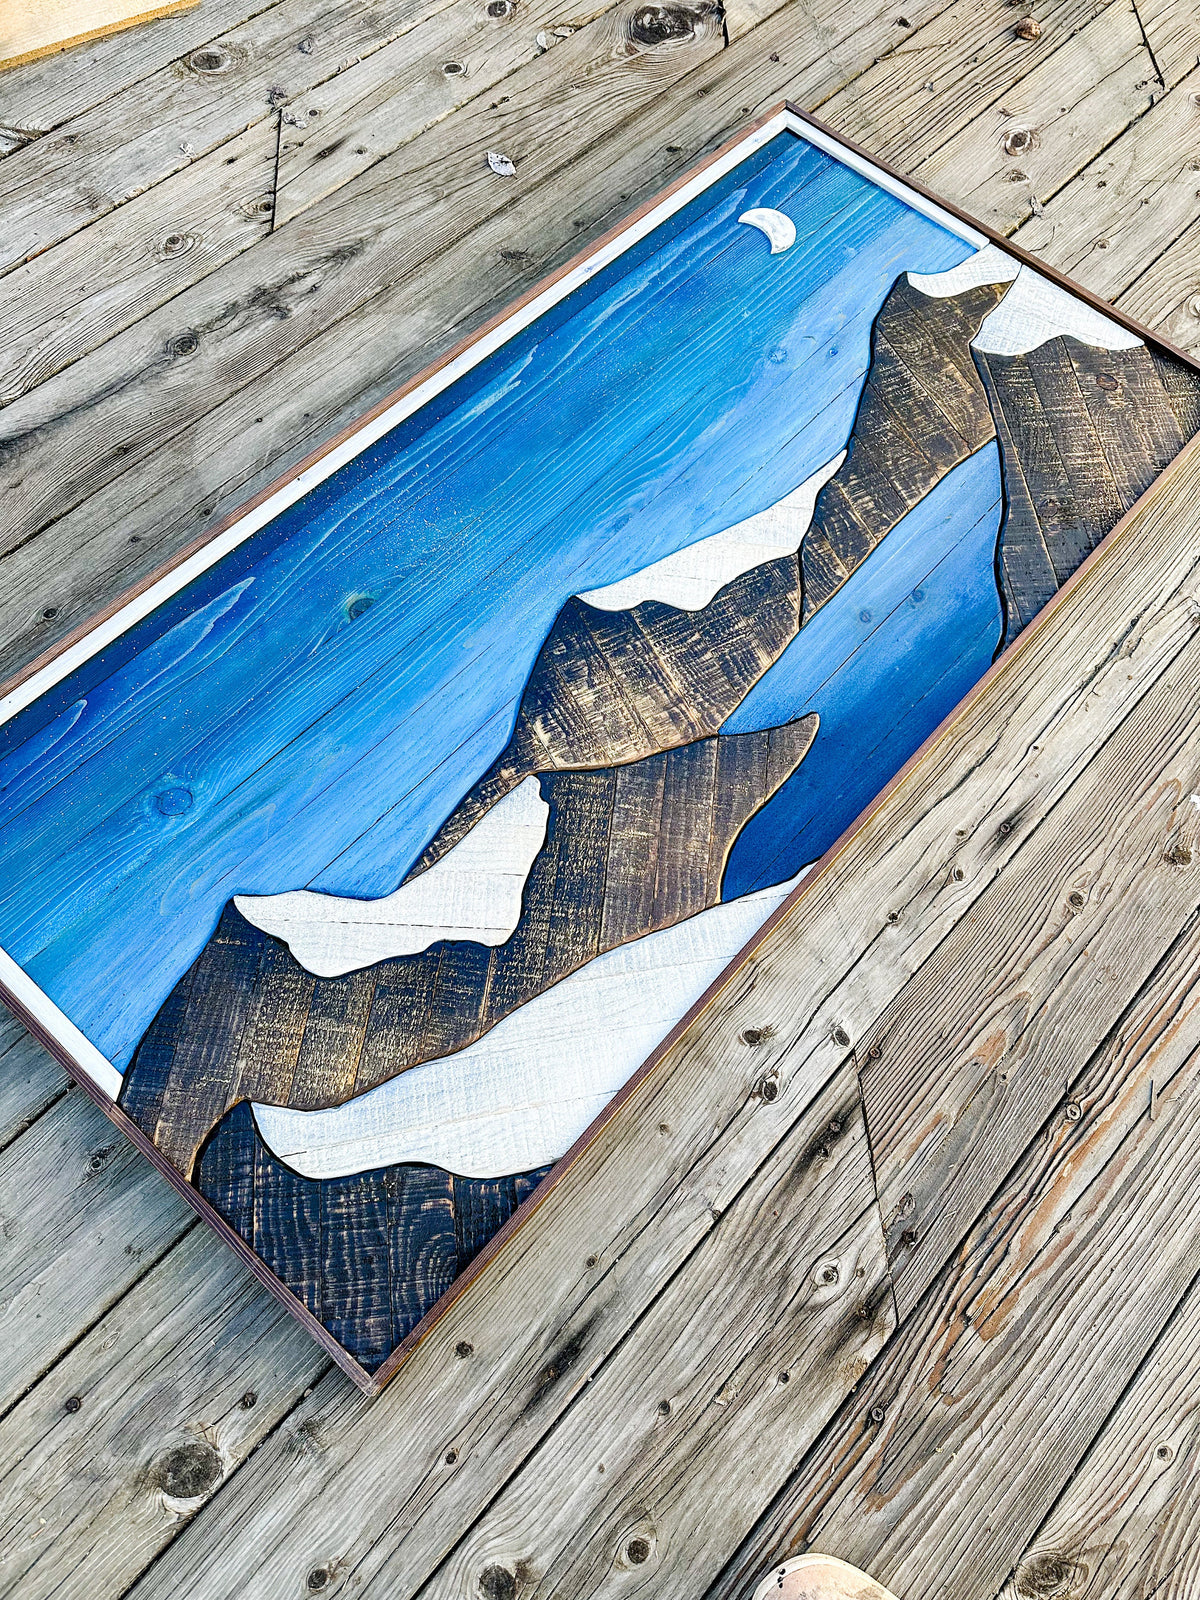 ALPINE Lake and Mountain Range Wood Artwork - Handcrafted Carved Wooden Mountain scene art wall hanging